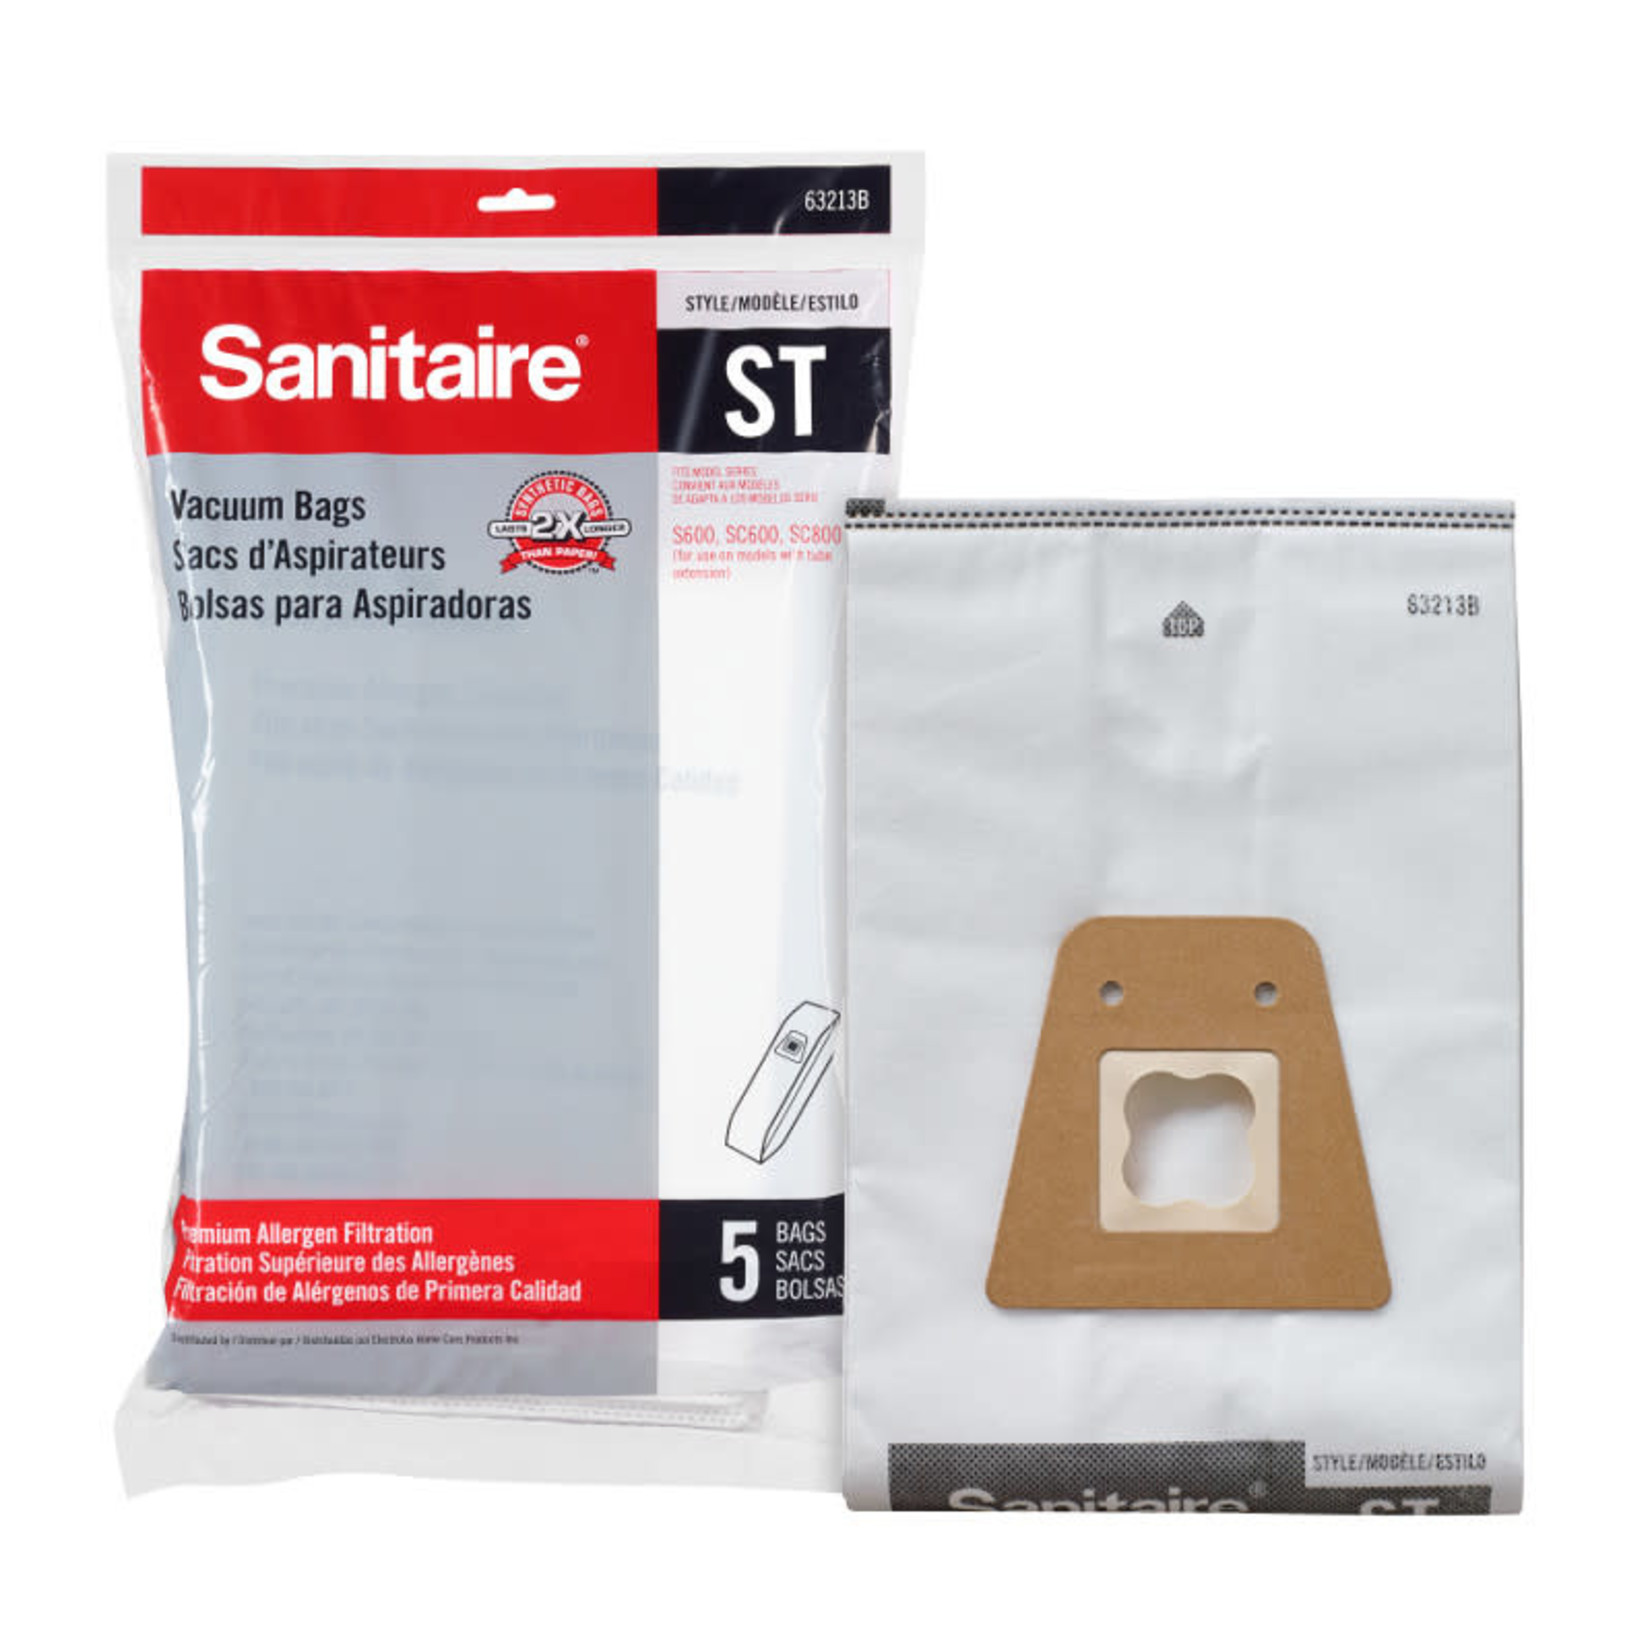 Sanitaire Sanitaire Style "ST" Bags (5pk)